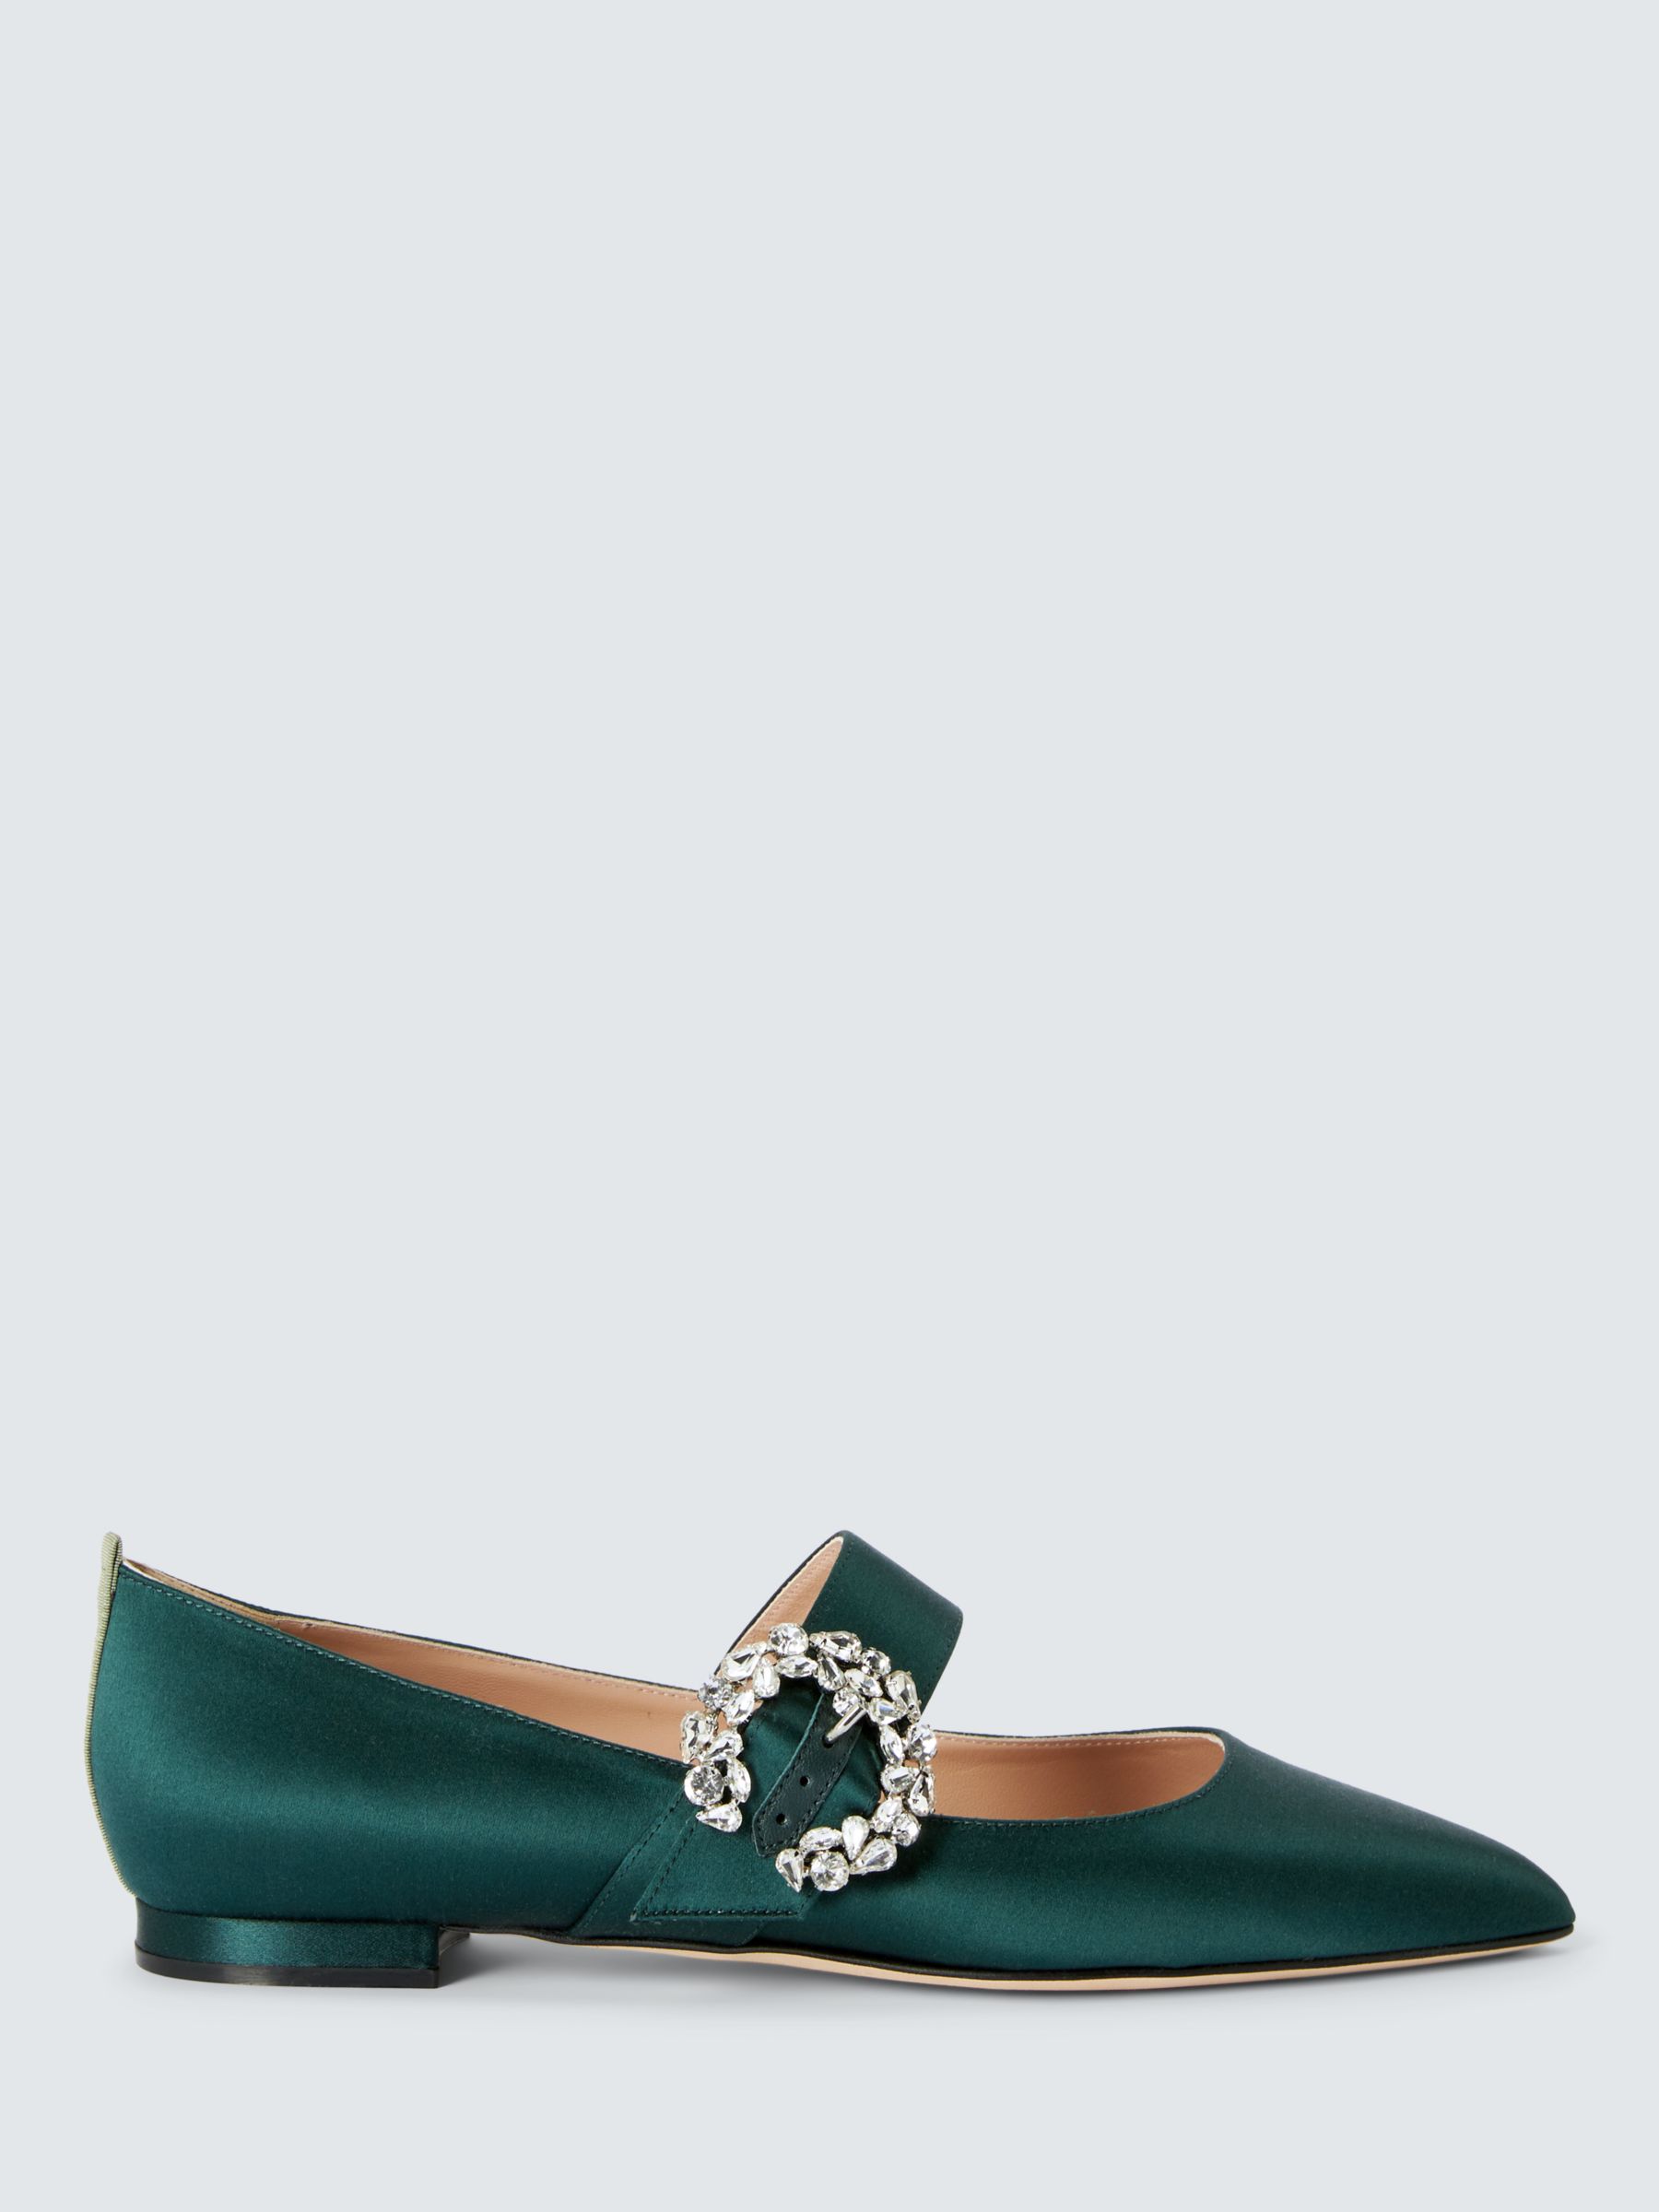 SJP by Sarah Jessica Parker Chime Satin Pointed Mary Jane Flats, Jungle ...